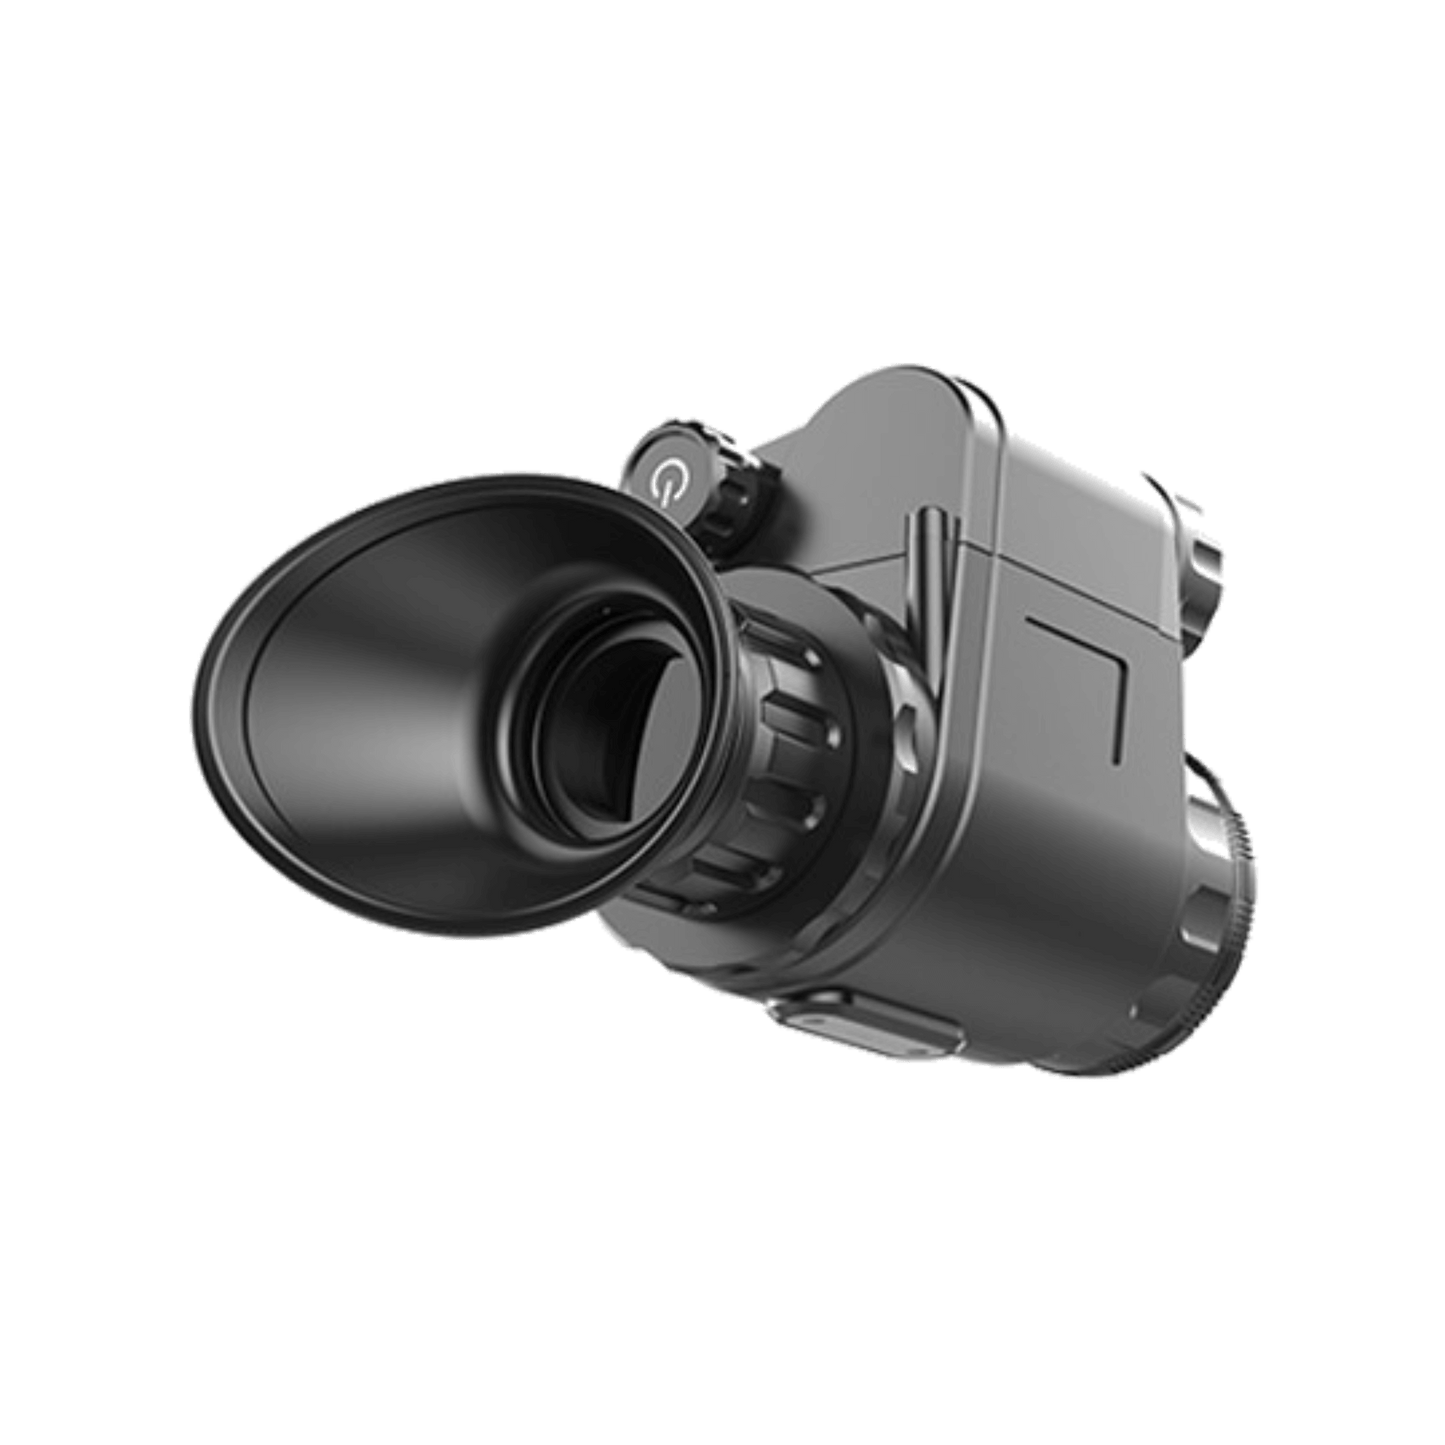 Infiray Mini Series MH25 Handheld and helment mount thermal Imaging monocular - Infiray MH25 TTCW-MH25 rear view